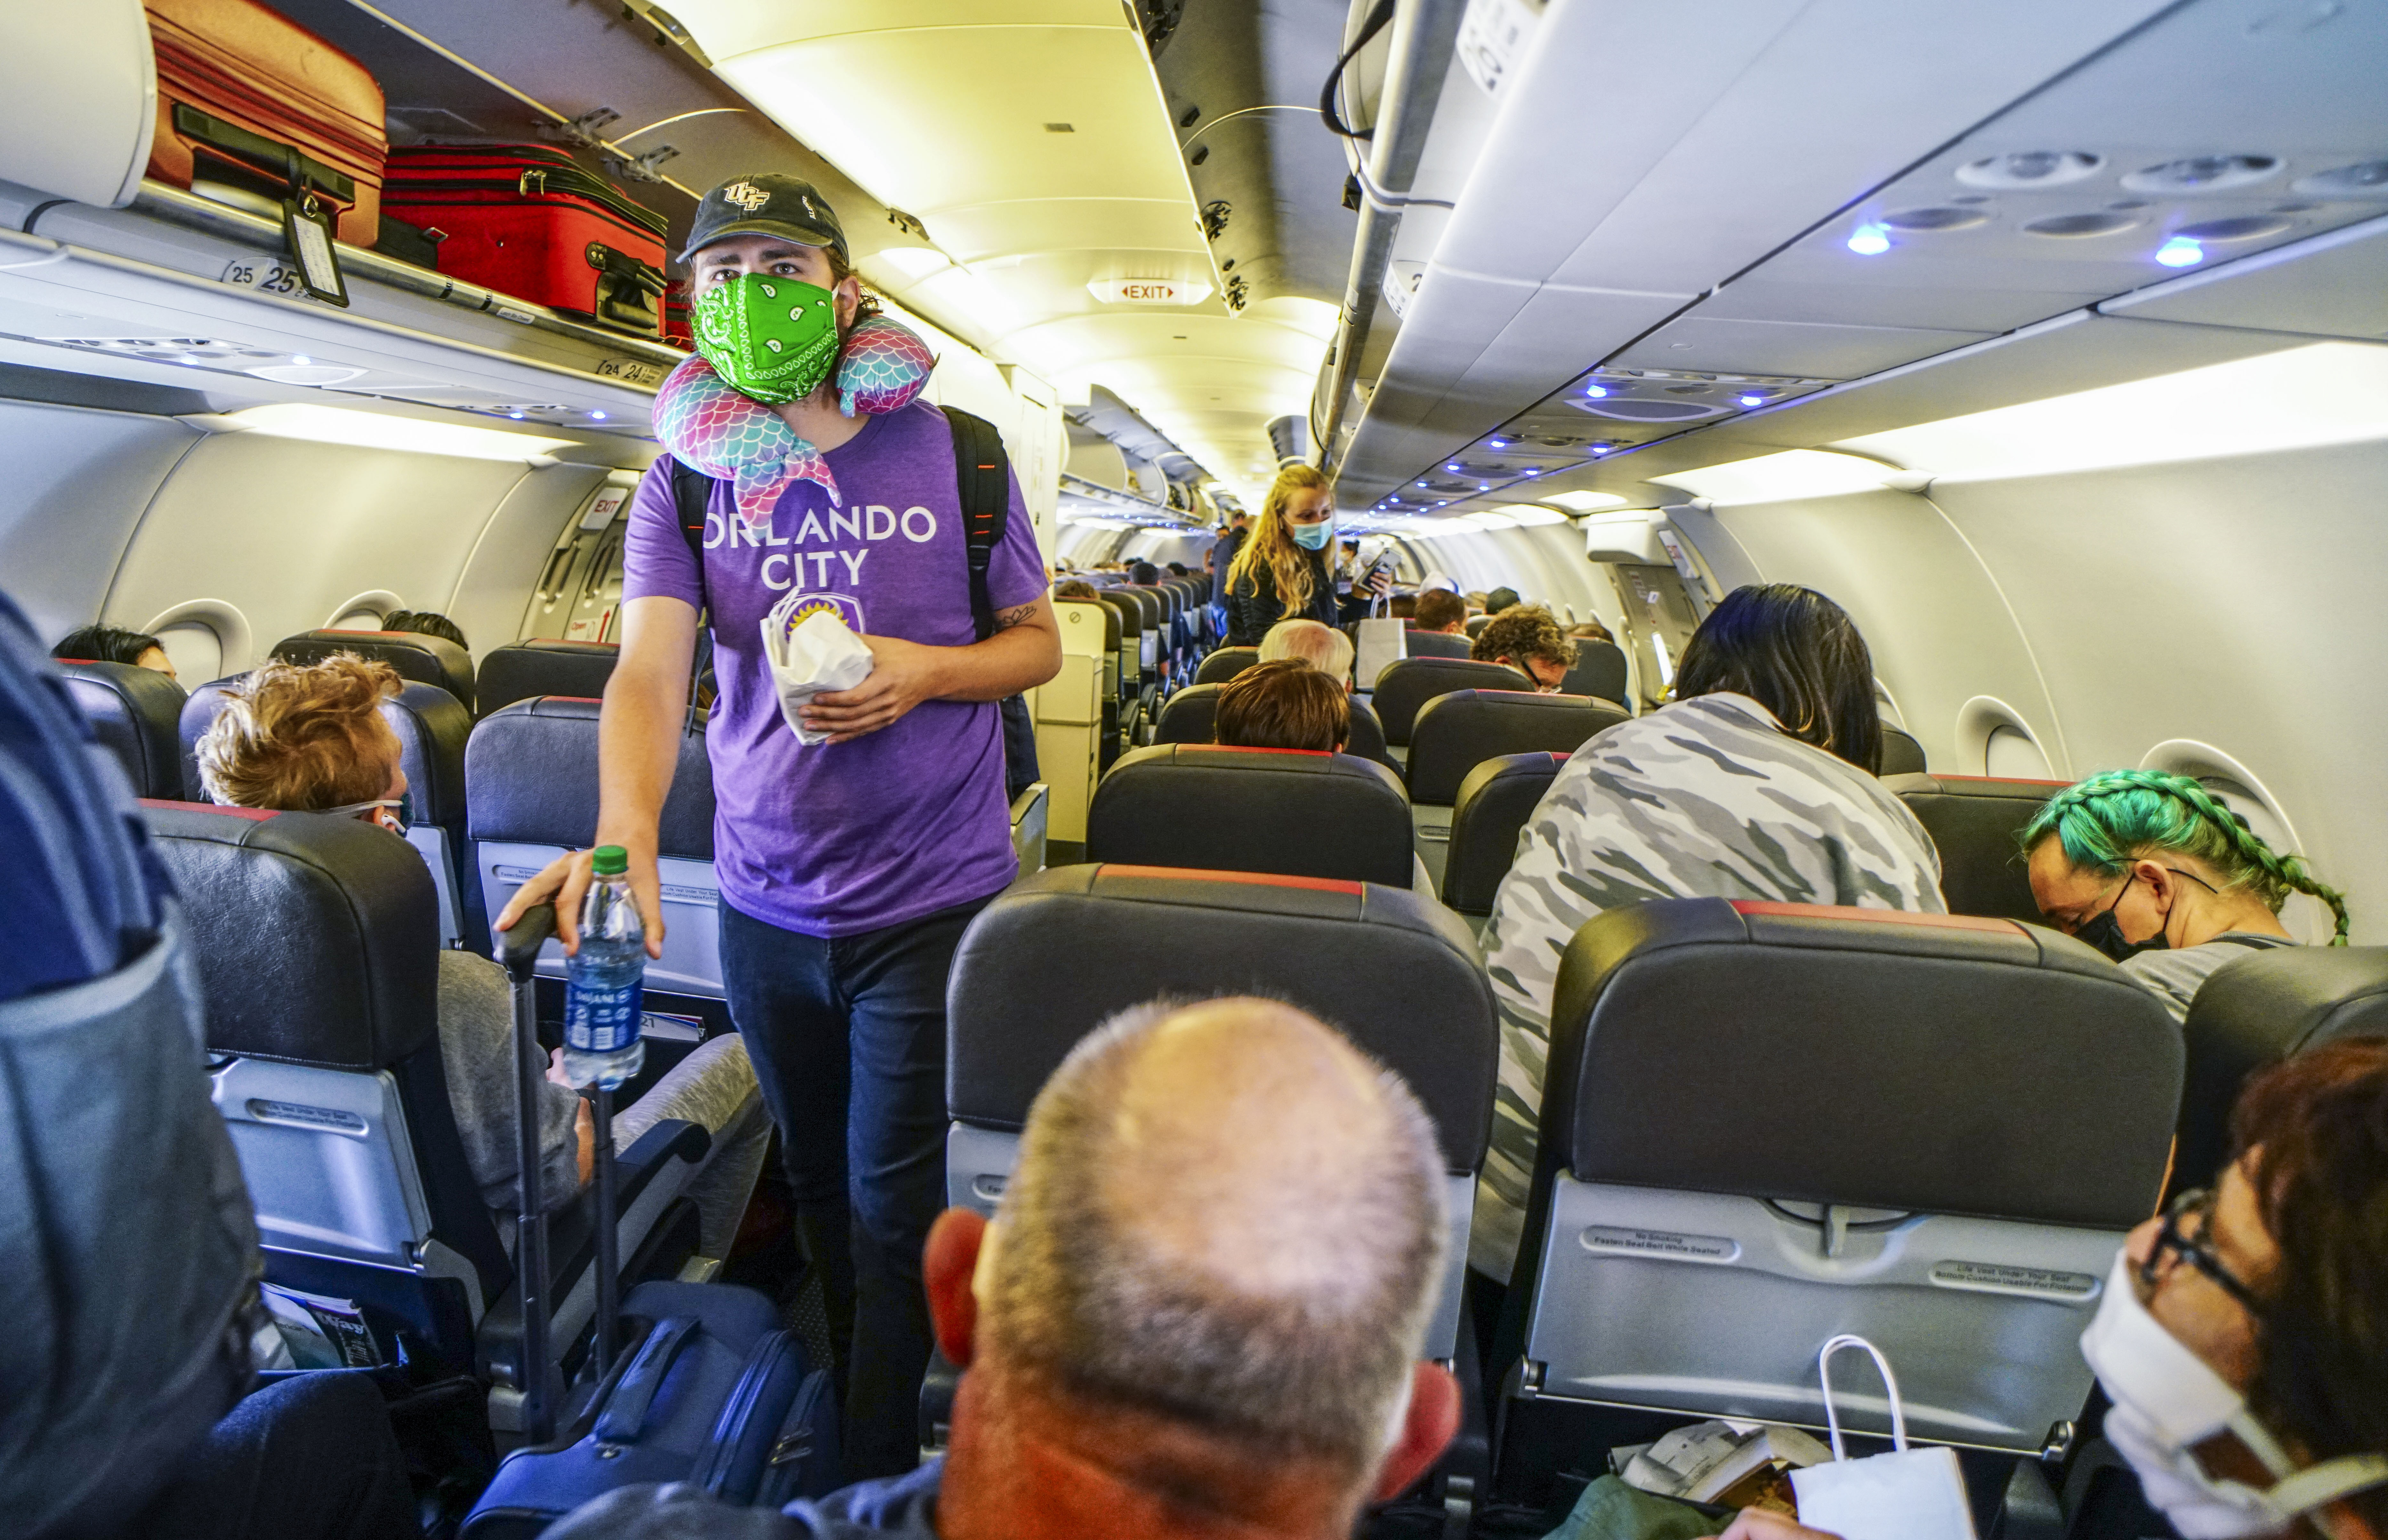 SAN DIEGO, CA-MAY 20: Passengers board an American Airlines flight to Charlotte, North Carolina at San Diego International Airport on May 20, 2020 in San Diego, California. Air travel is down as estimated 94 percent due to the coronavirus (COVID-19) pandemic, causing U.S. airlines to take a major financial hit with losses of $350 million to $400 million a day as nearly half of major carriers' planes sit idle. (Photo by Sandy Huffaker/Getty Images)